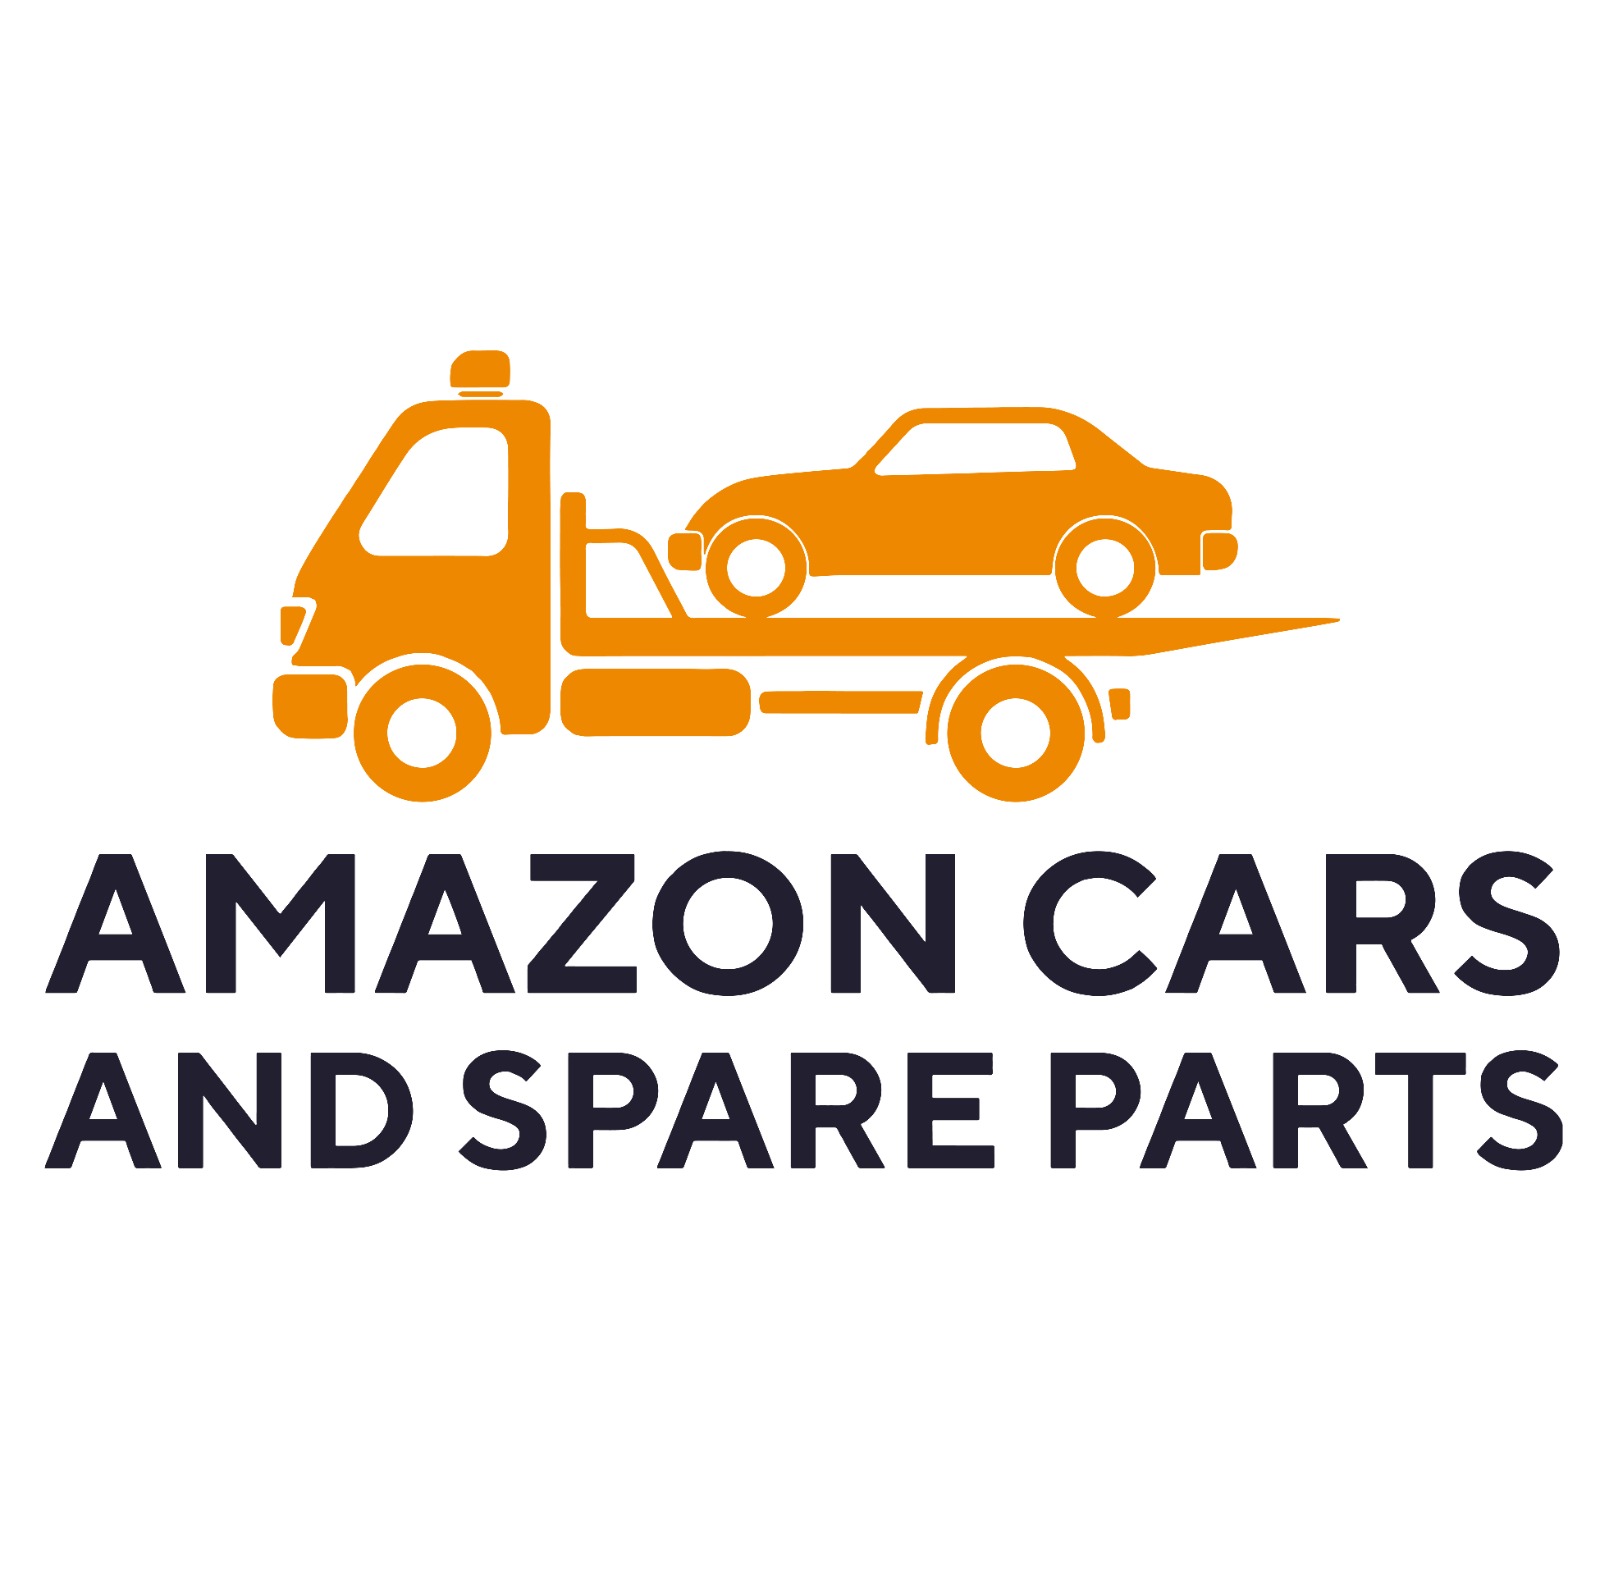 Amazon Cars and Spare Parts | 57-69 Tattersall Rd, Kings Park NSW 2148, Australia | Phone: 0412 711 318